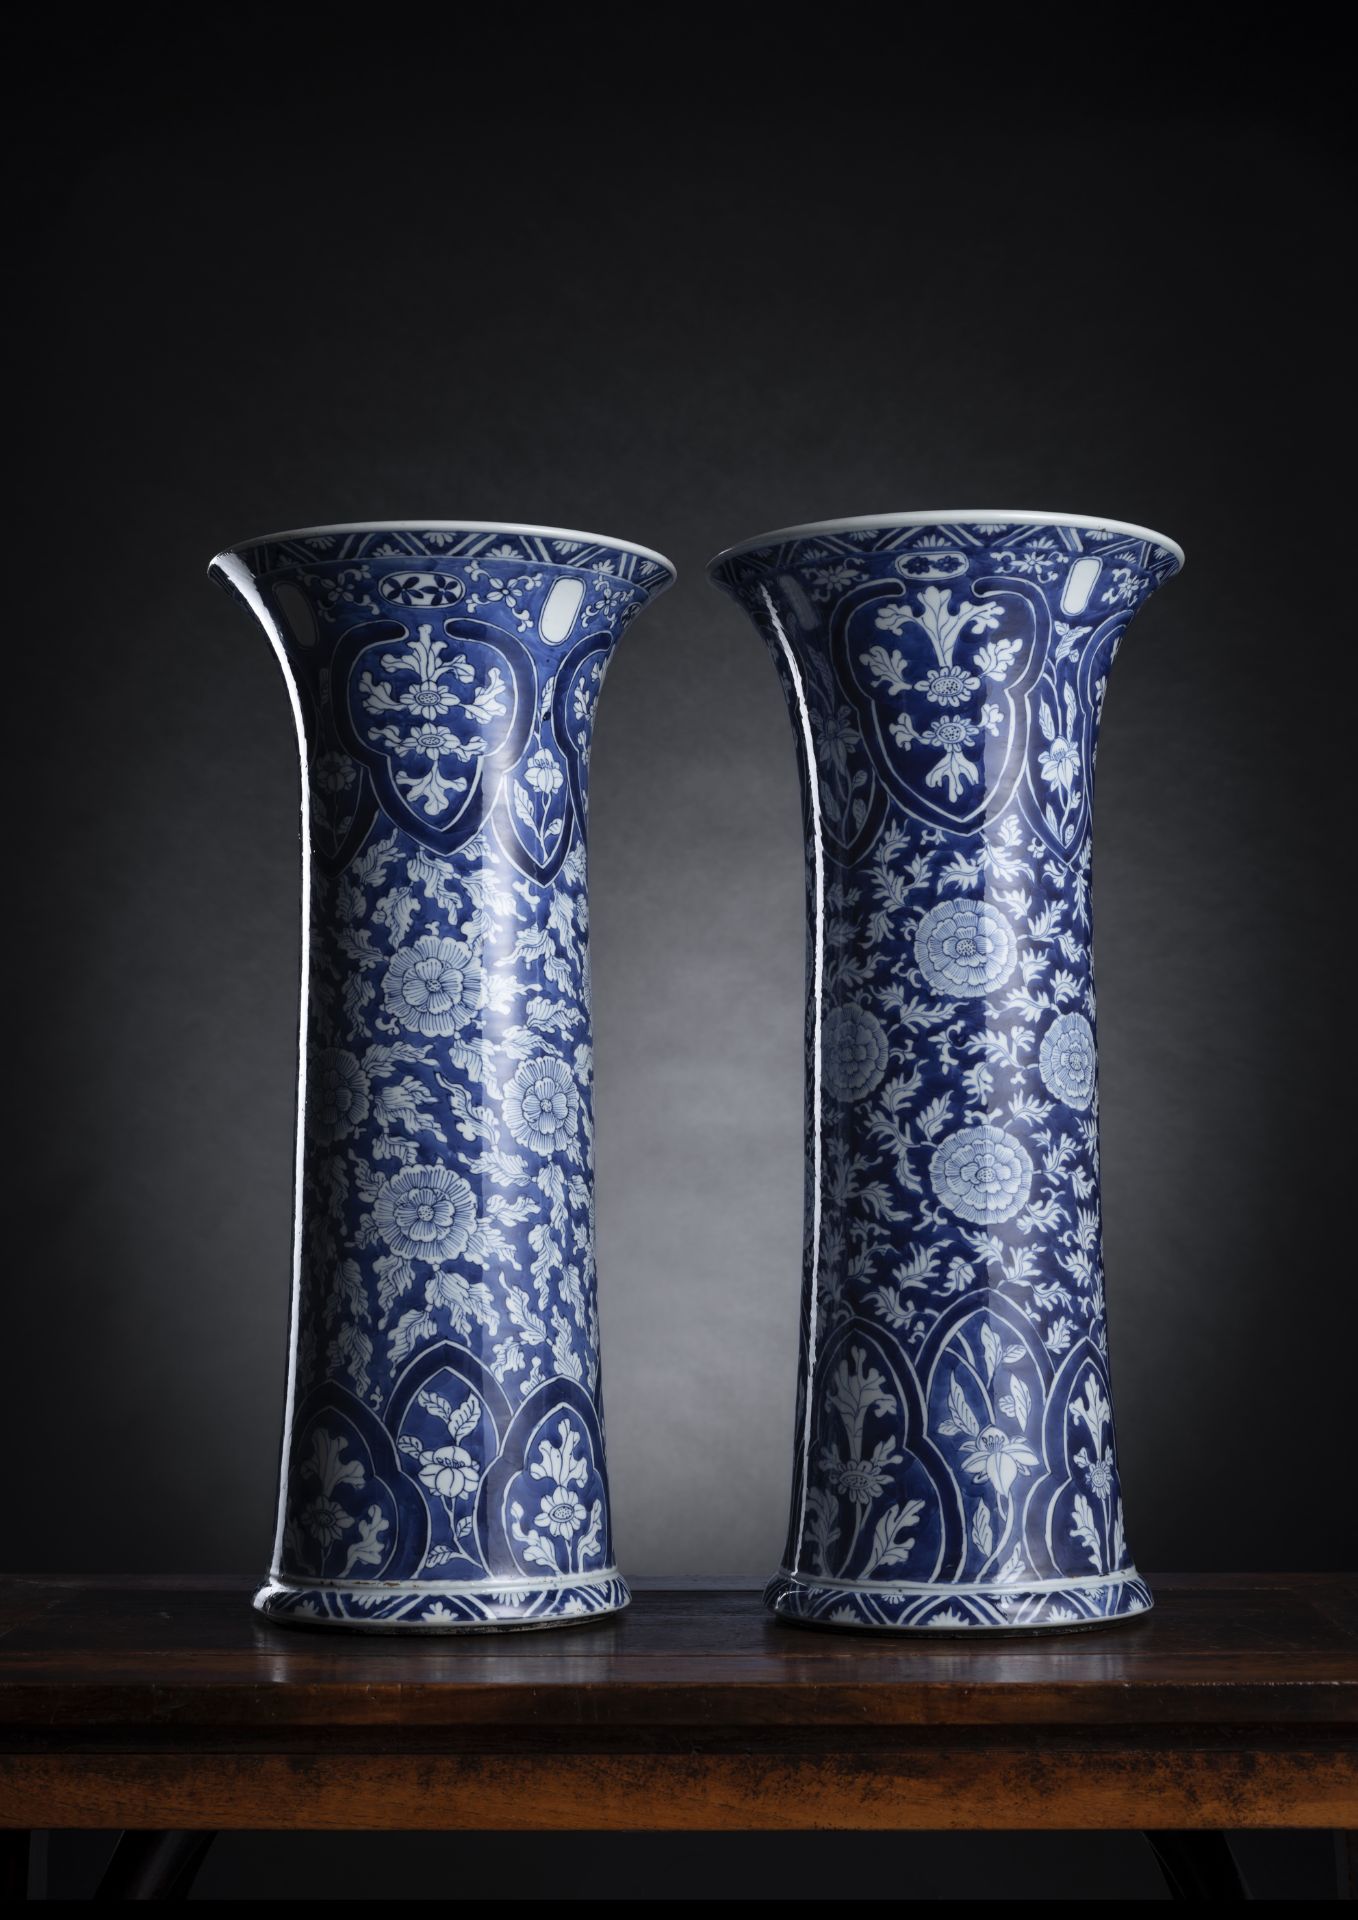 A FINE AND VERY RARE PAIR OF BLUE AND WHITE VASES WITH DIFFERENT FLOWERS SCROLLWORK FROM THE COLLEC